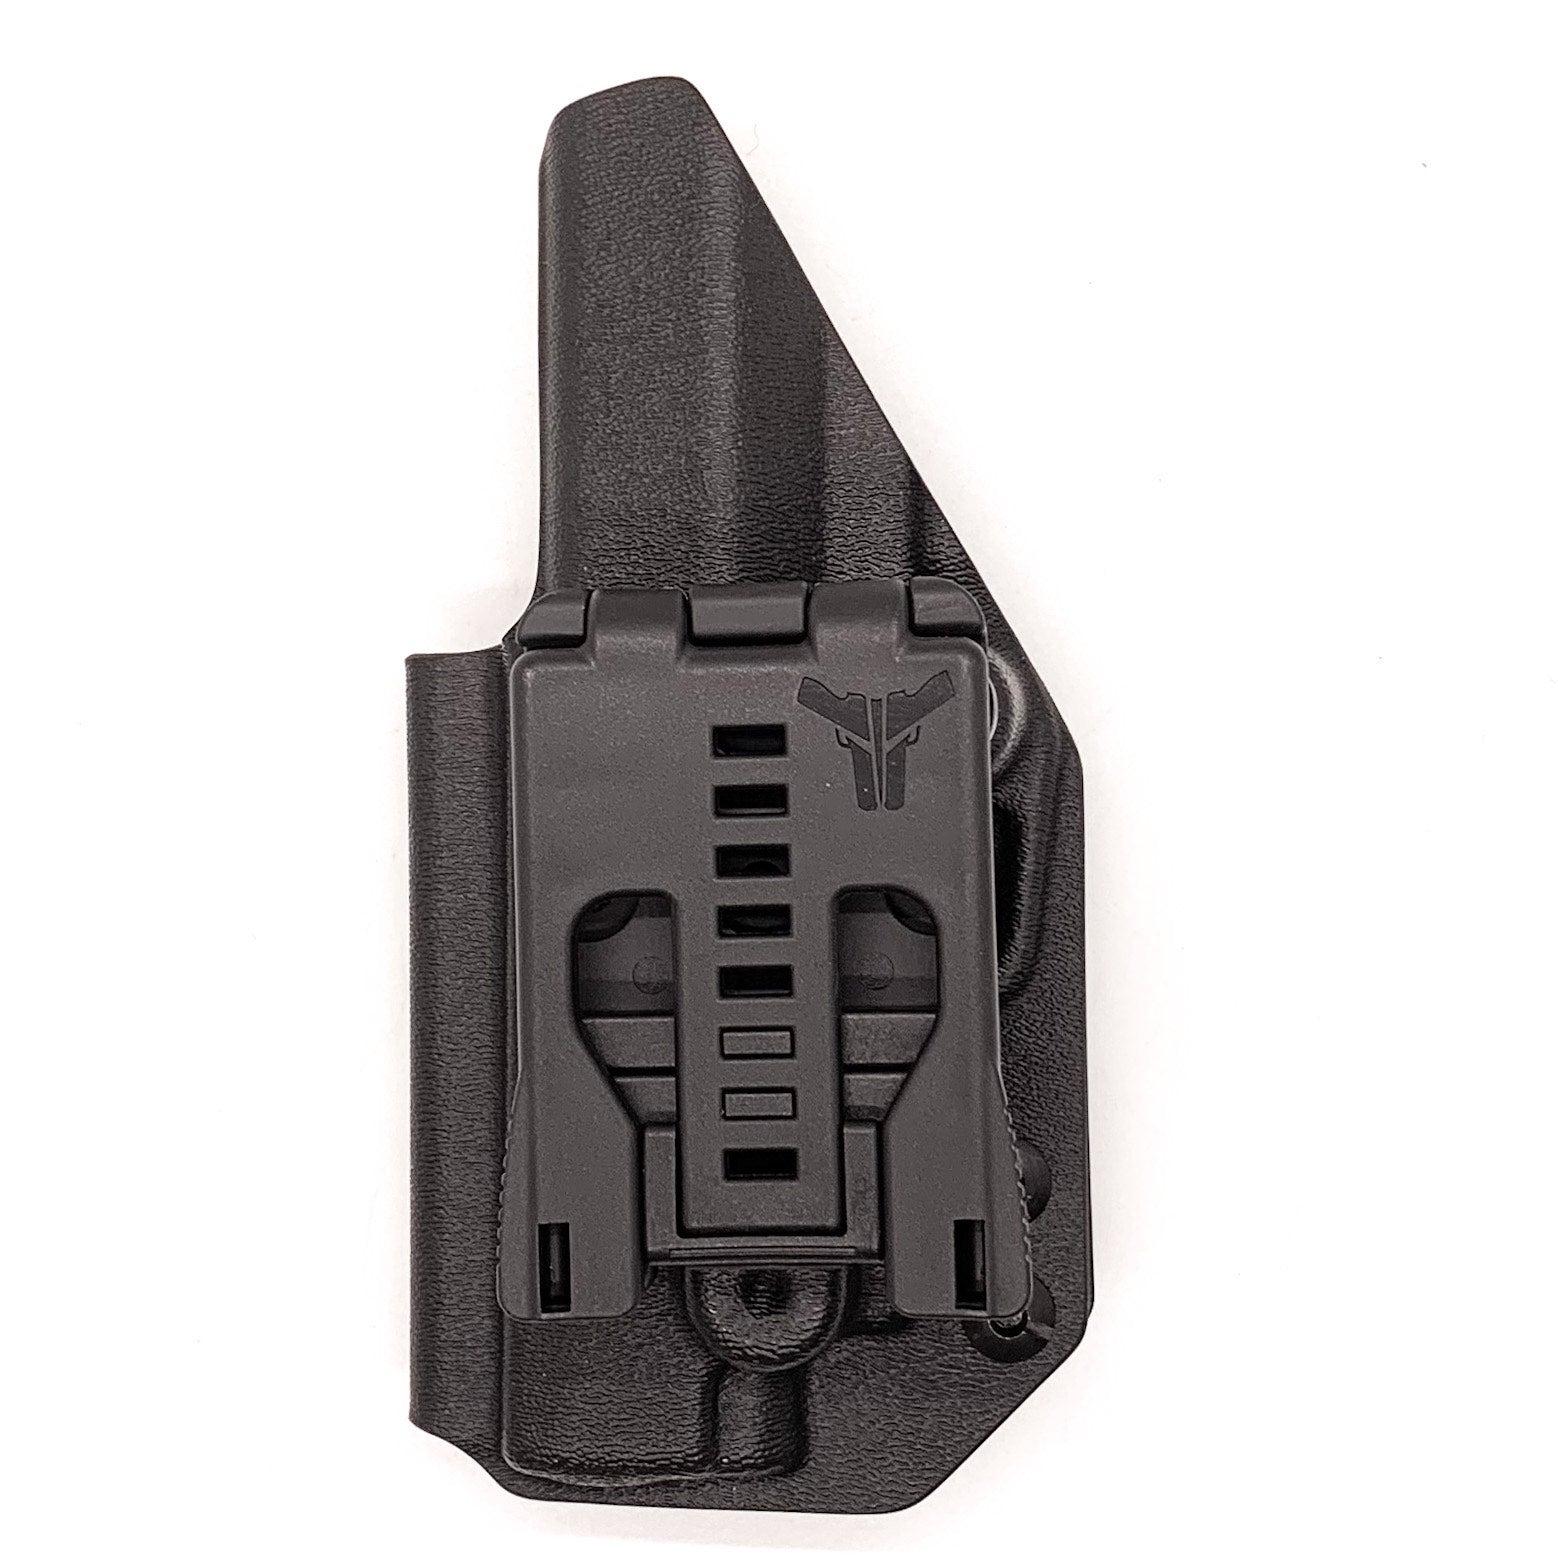 Outside Waistband OWB Kydex holster designed to fit the Sig Sauer P365XL, P365X, P365XL Spectre,  P365X/XL RomeoZero, and P365 SAS with GoGuns Gas Pedal. Adjustable retention, high sweat guard, and cleared for red dot sights. Proudly made in the USA with .080" thick material. 